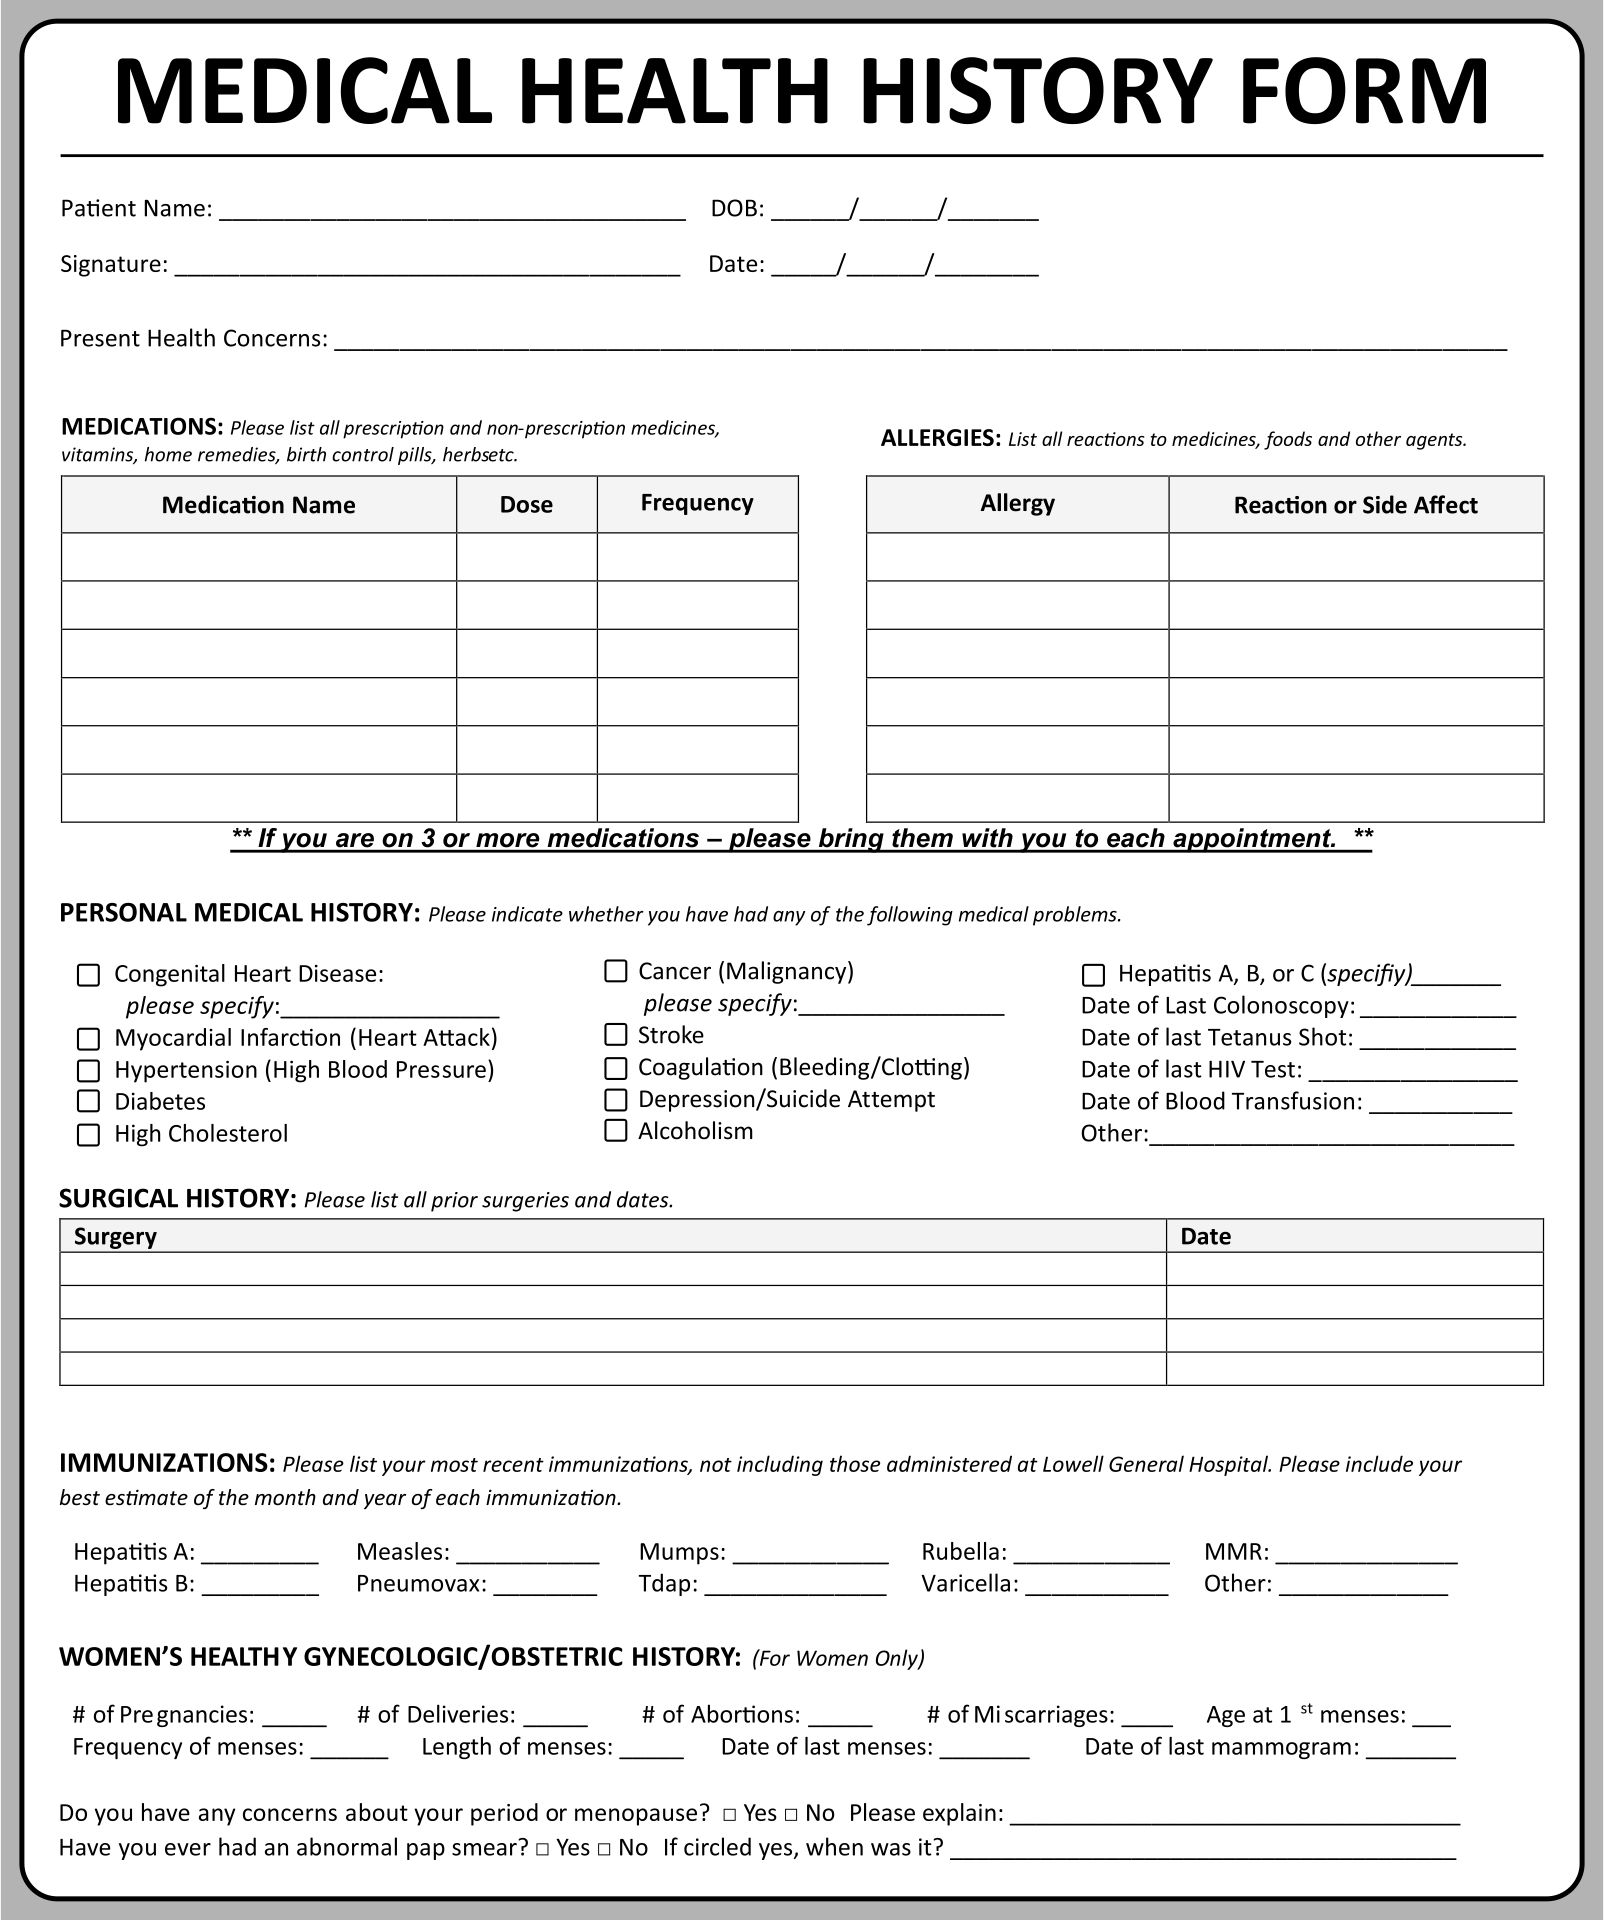 Medical Health History Form Template